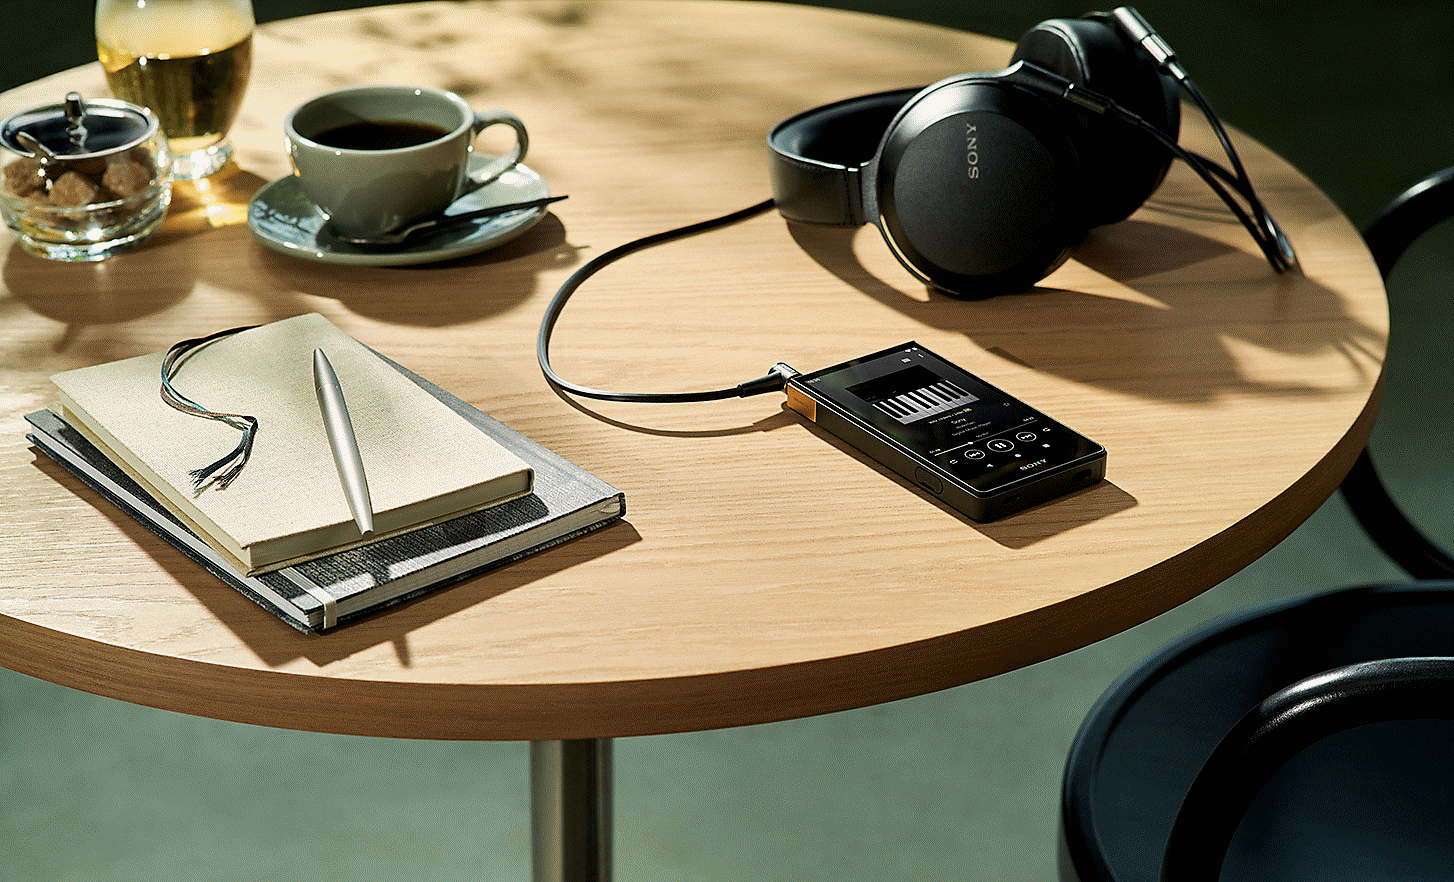 An image of the NW-ZX707 laying on a table, with Sony headphones.